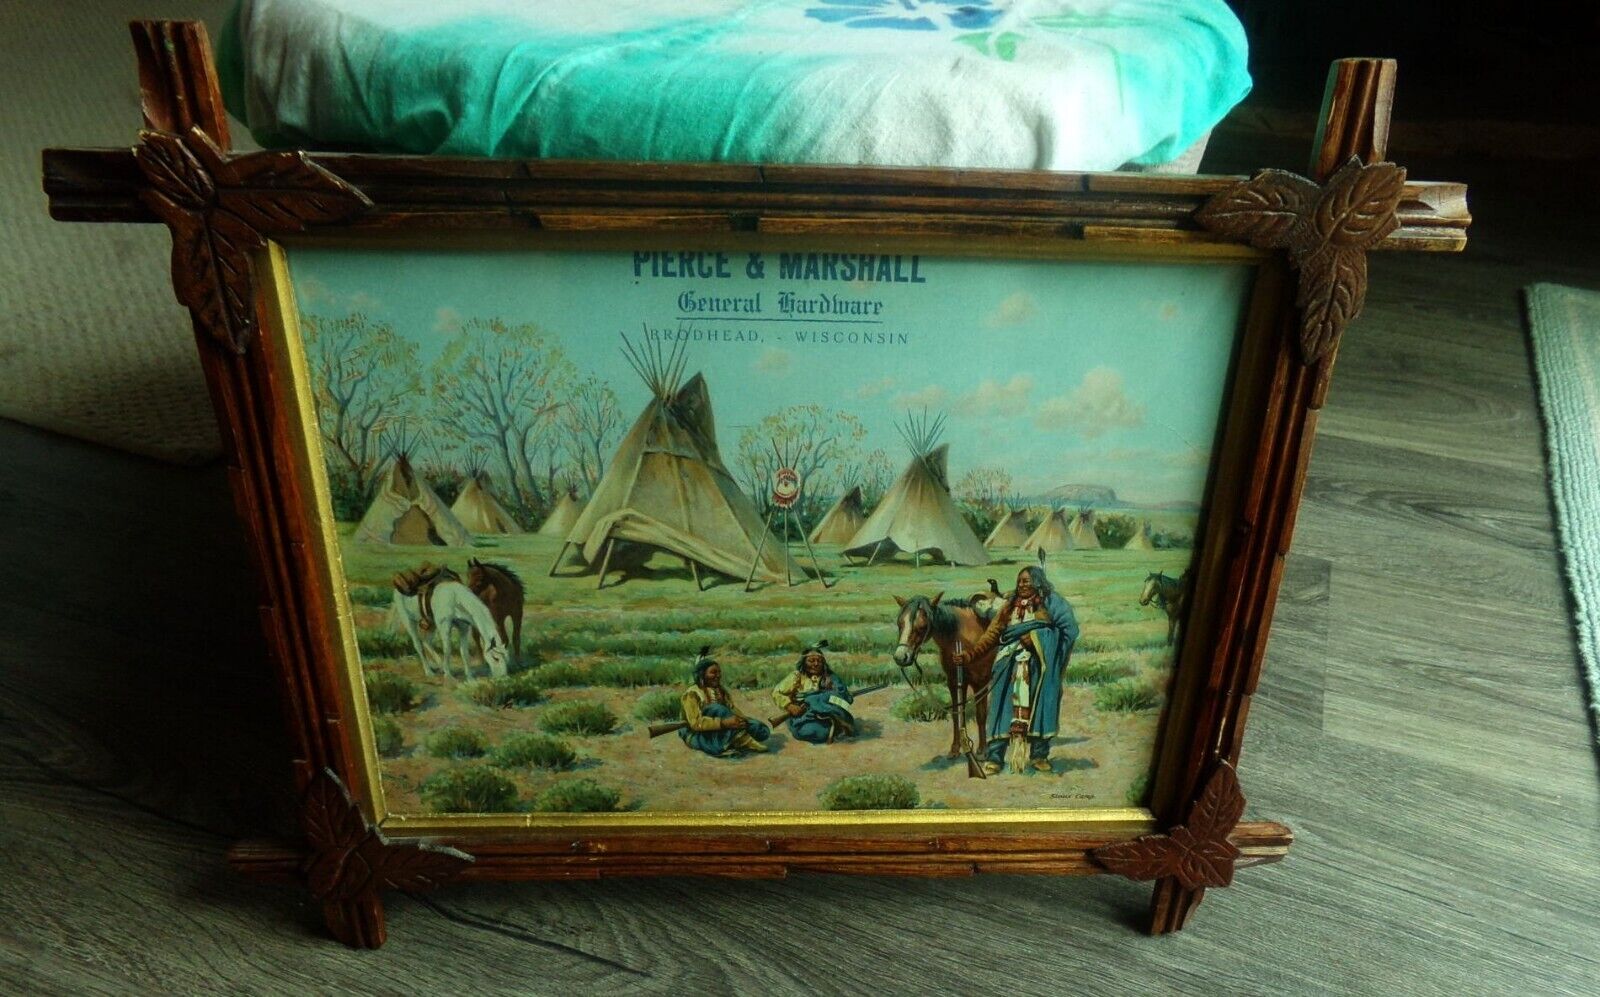 ANTIQUE HARDWARE BRODHEAD WI. INDIAN SIOUX CAMP ADVERTISING PRINT JOHN HAUSER